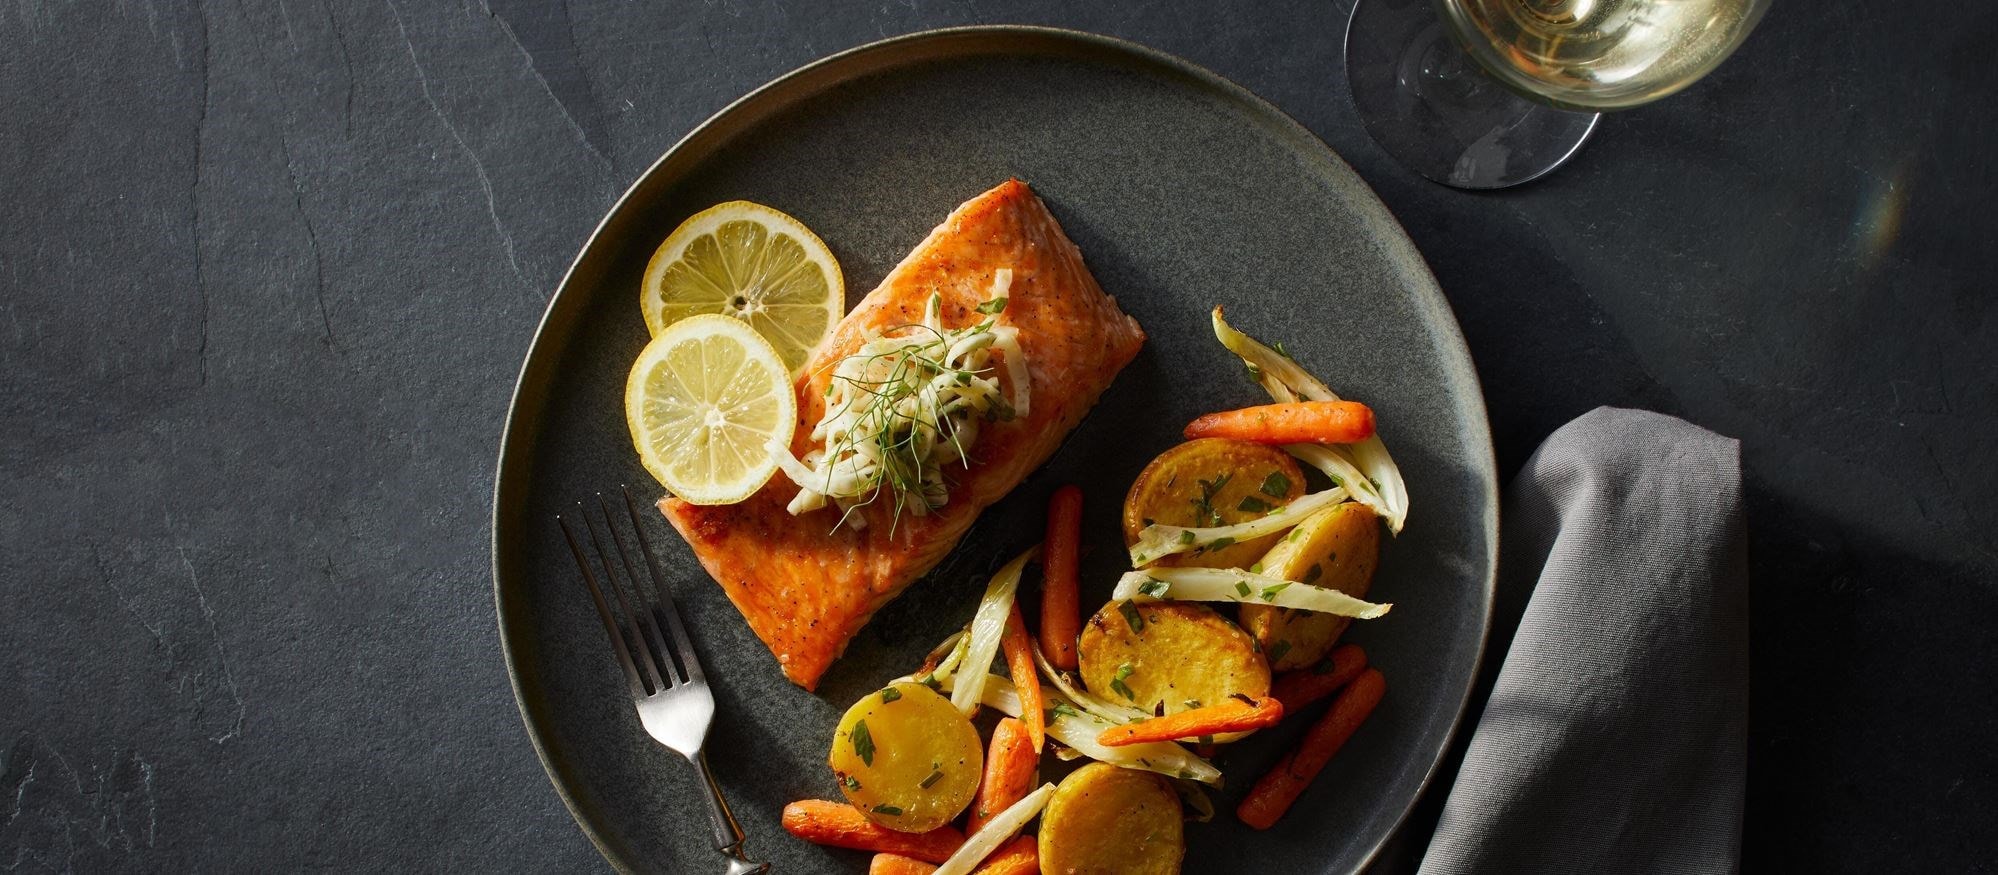 Wild Salmon Roasted in Foil With Vegetables and Herbs